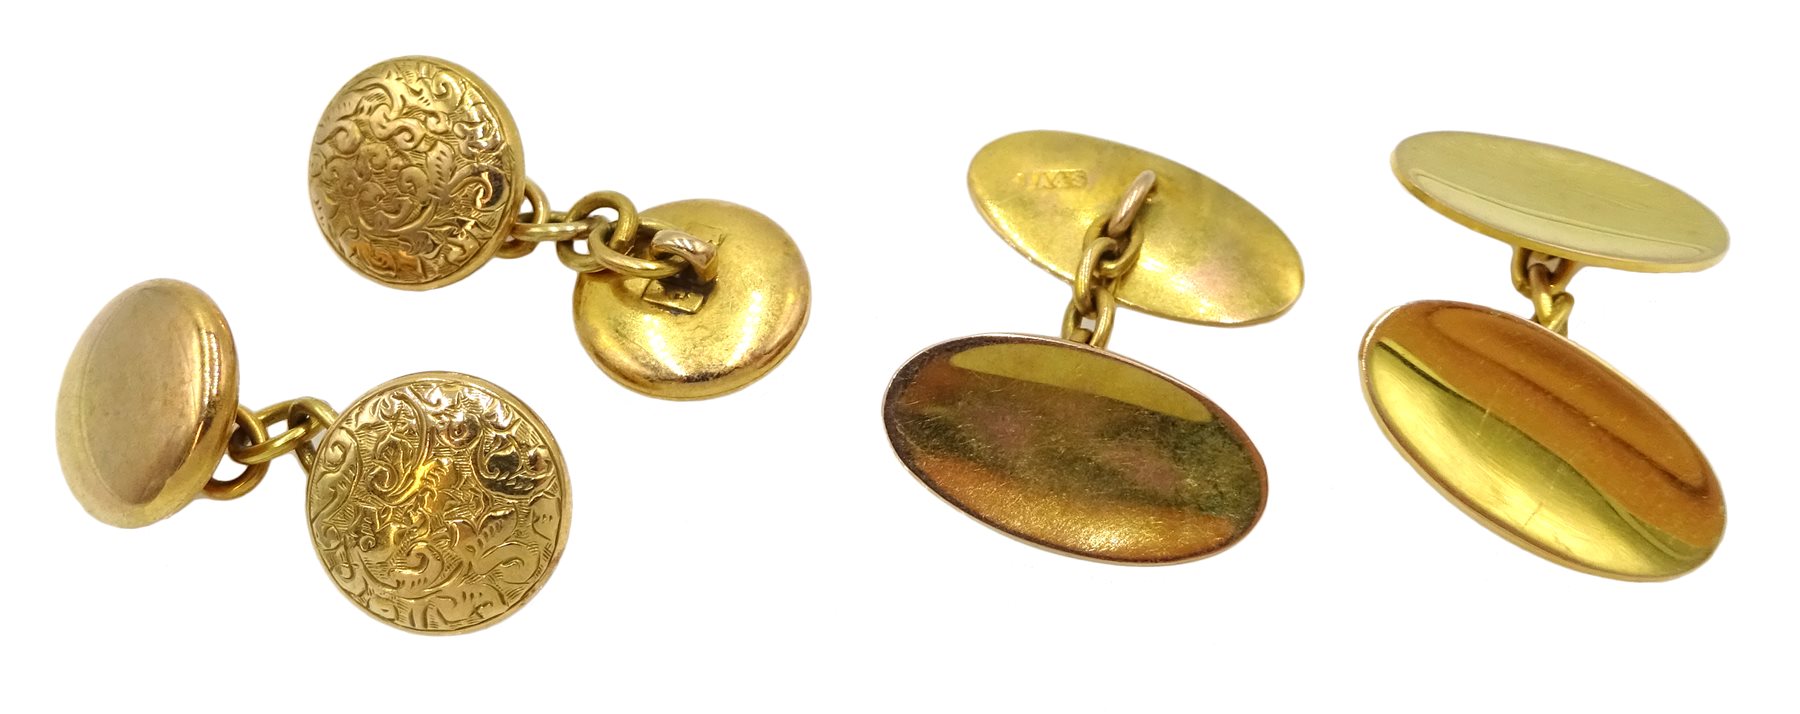 Pair of gold oval cufflinks by J Aitkin & Son, Birmingham 1909, and one other circular pair stamped